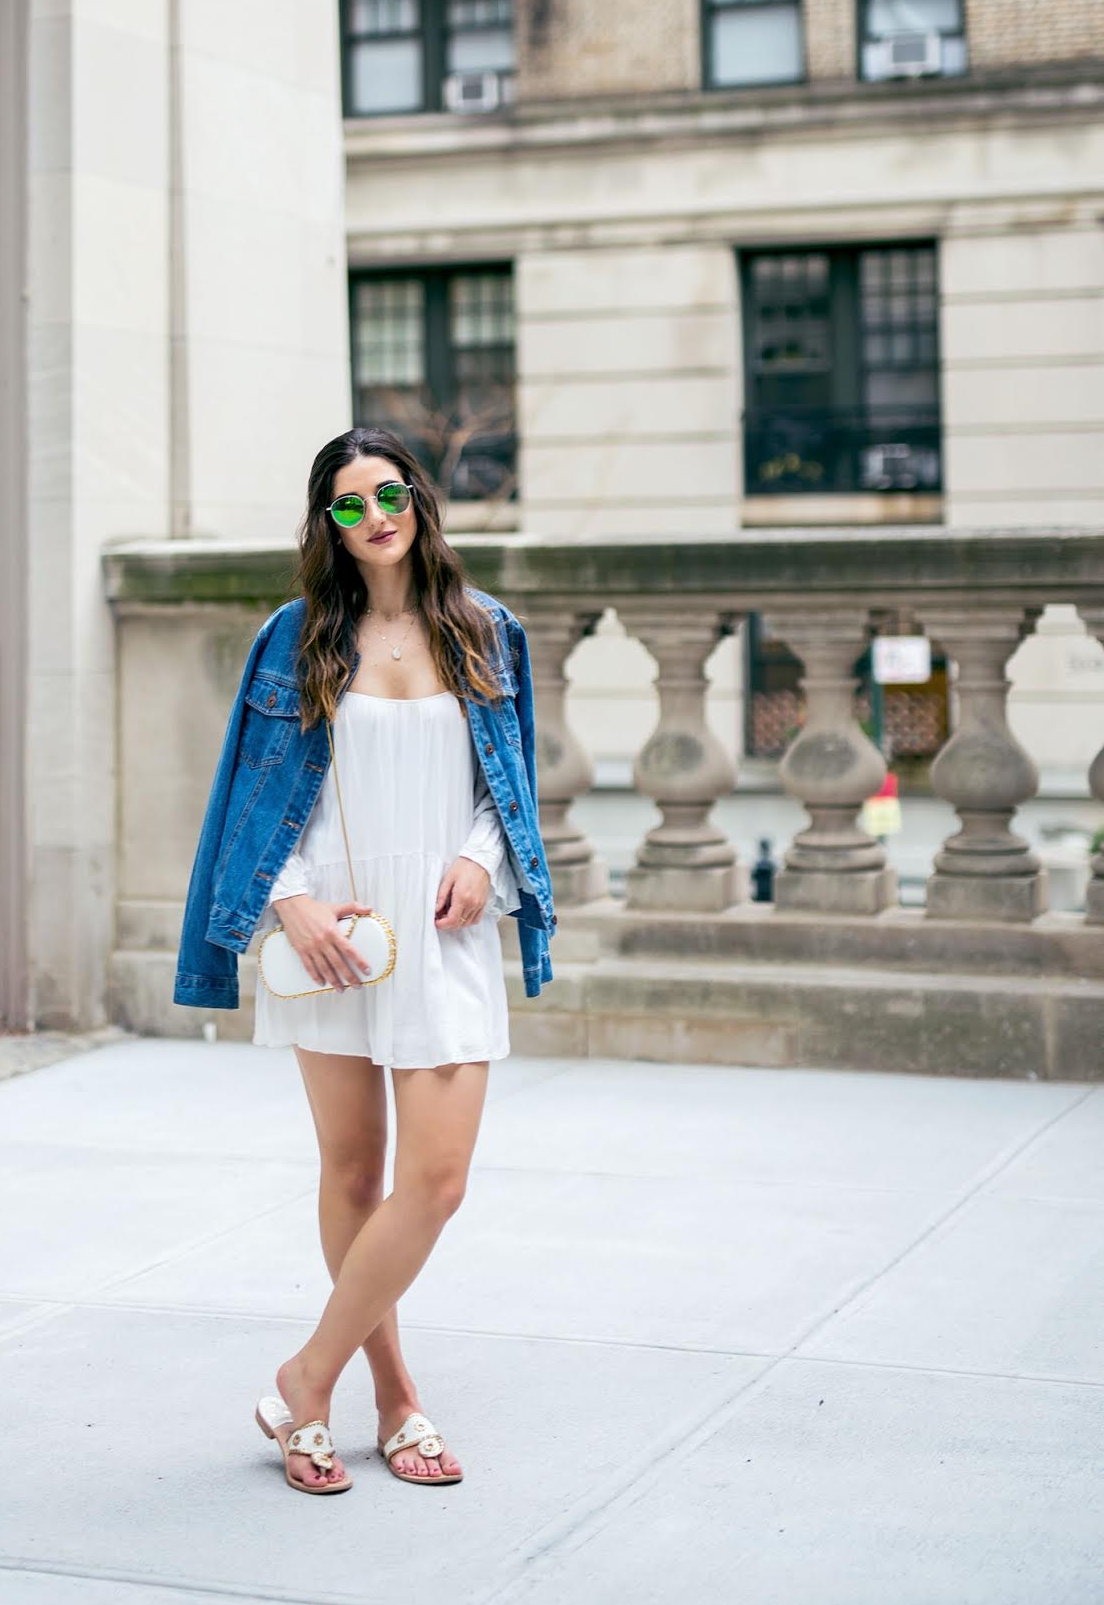 White Romper Jack Rogers Sandals Louboutins & Love Fashion Blog Esther Santer NYC Street Style Blogger Outfit OOTD Trendy Summer Spring Shopping Girls Women Hair Jean Jacket Denim Chokers Leather Shoes Long Sleeves Quality Pretty Cute Beautiful Look.jpg